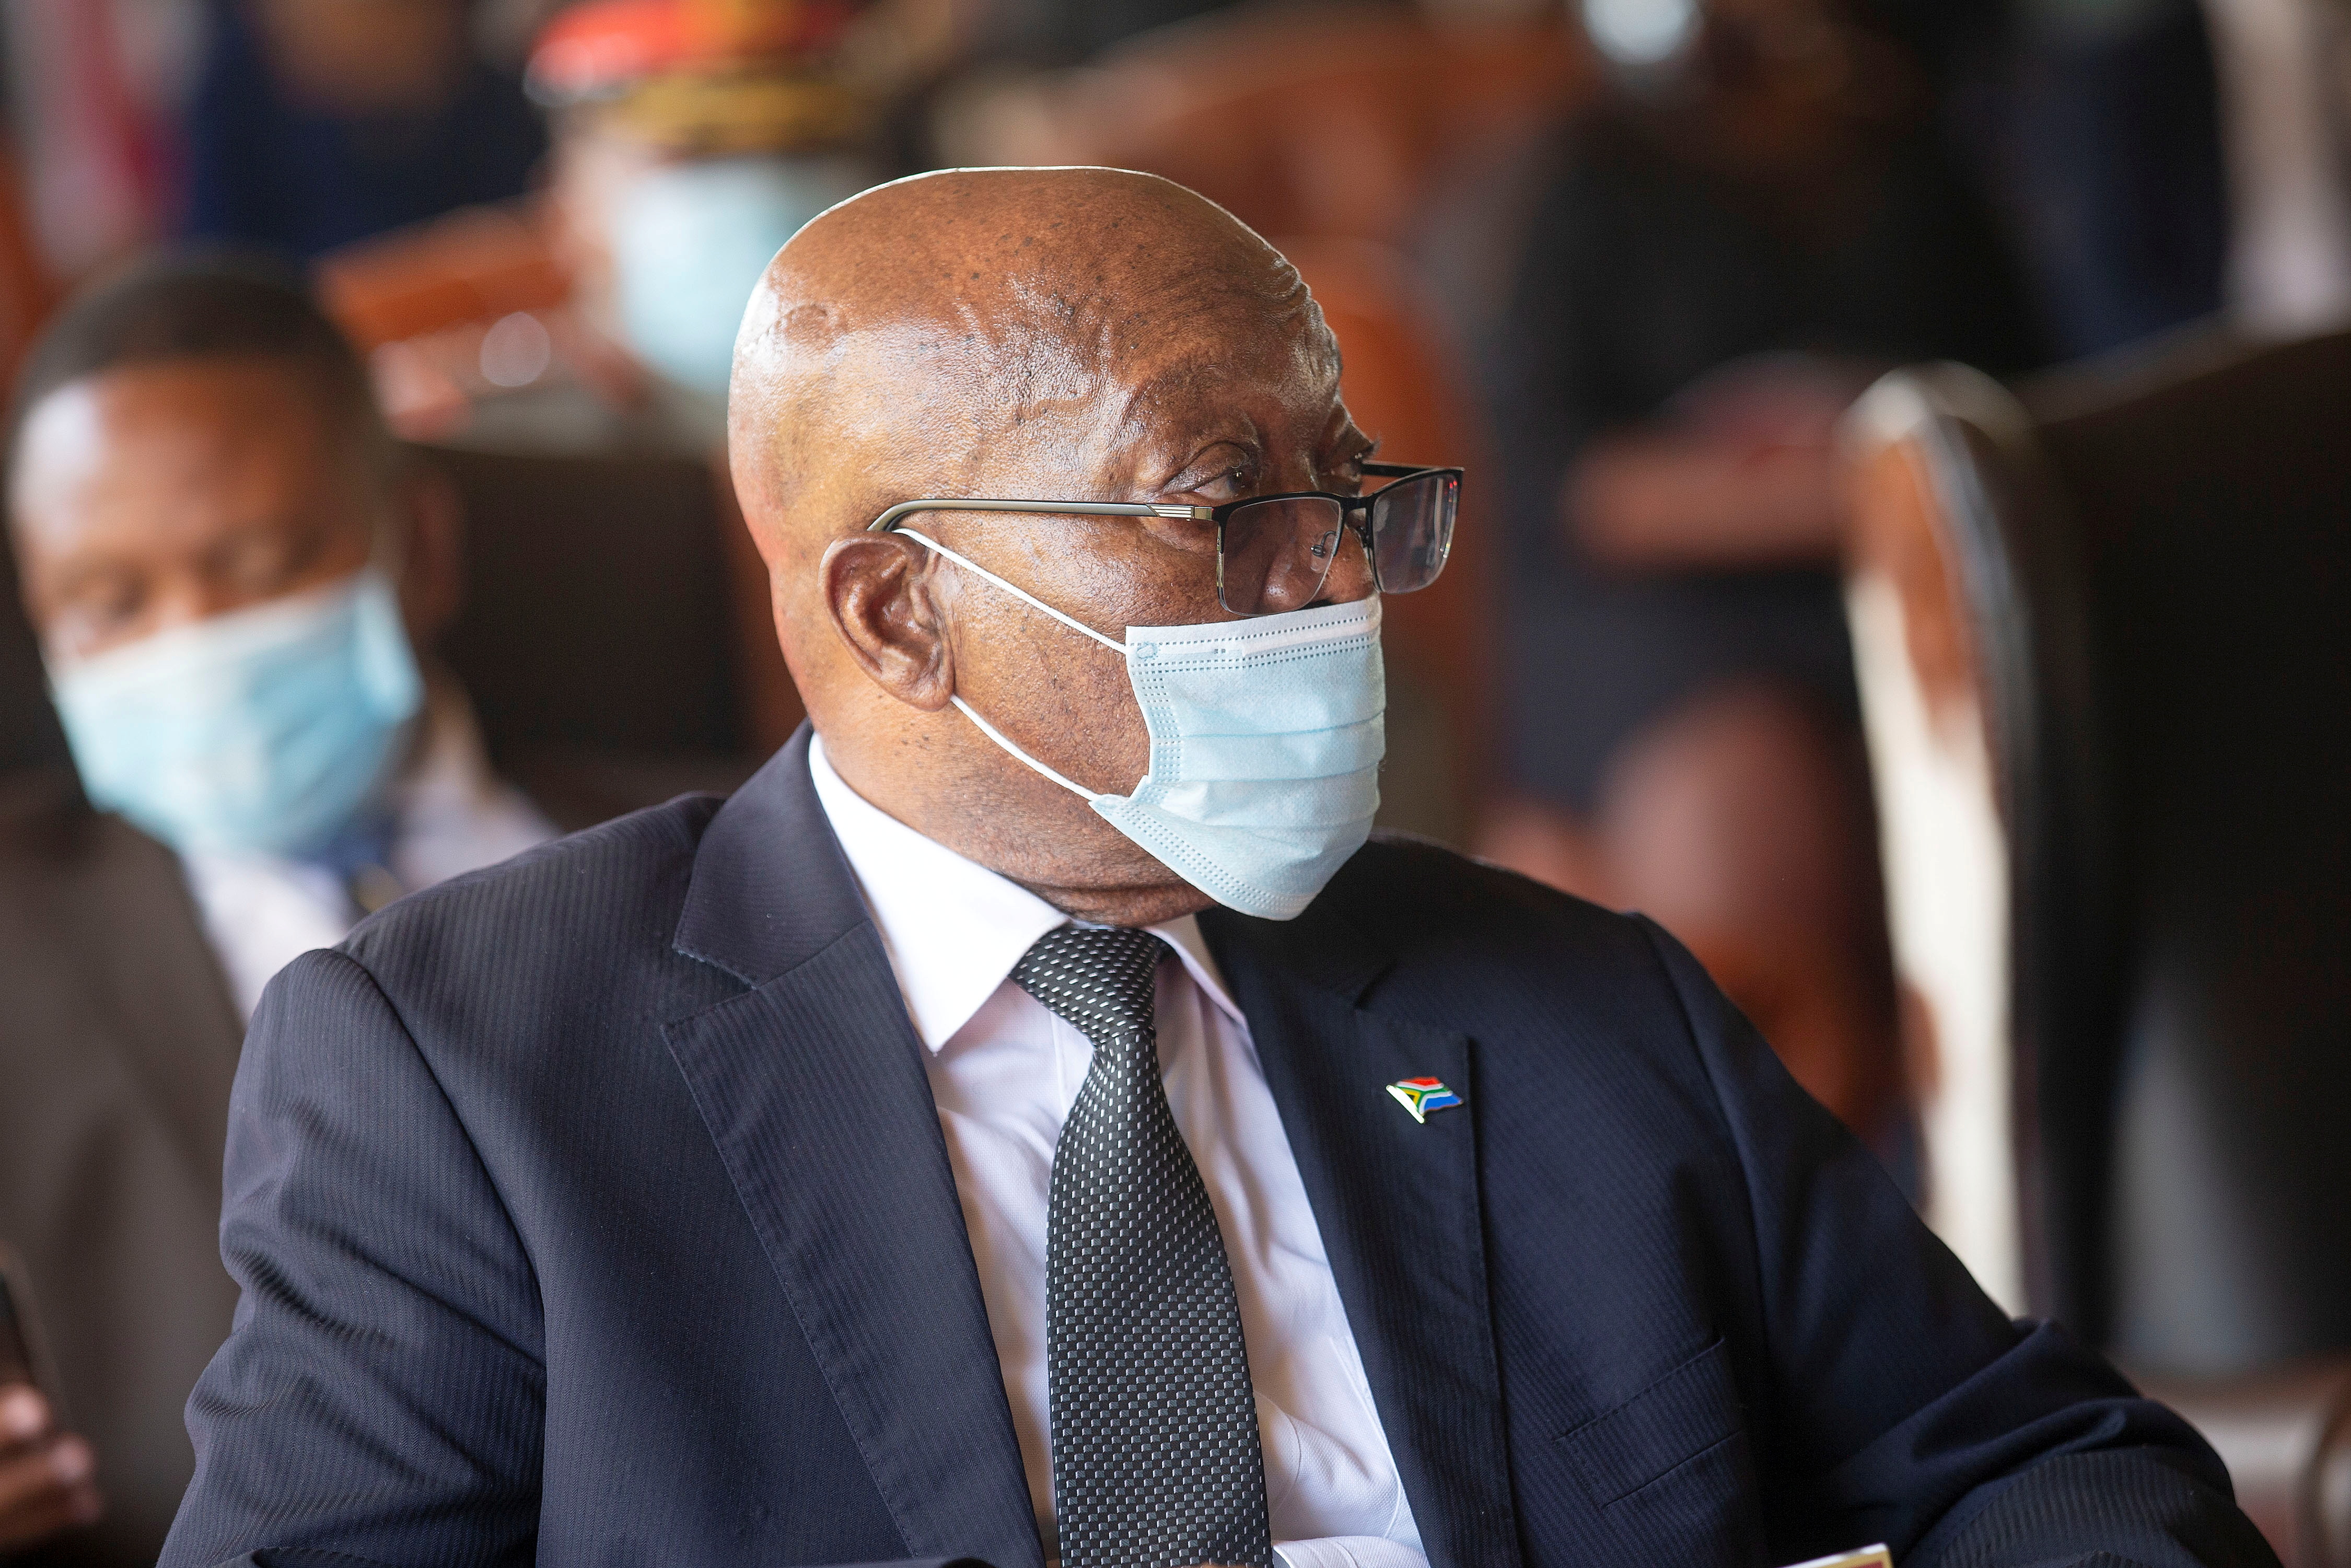 Former South African President Jacob Zuma attends the memorial service for Zulu King Goodwill Zwelithini in Nongoma